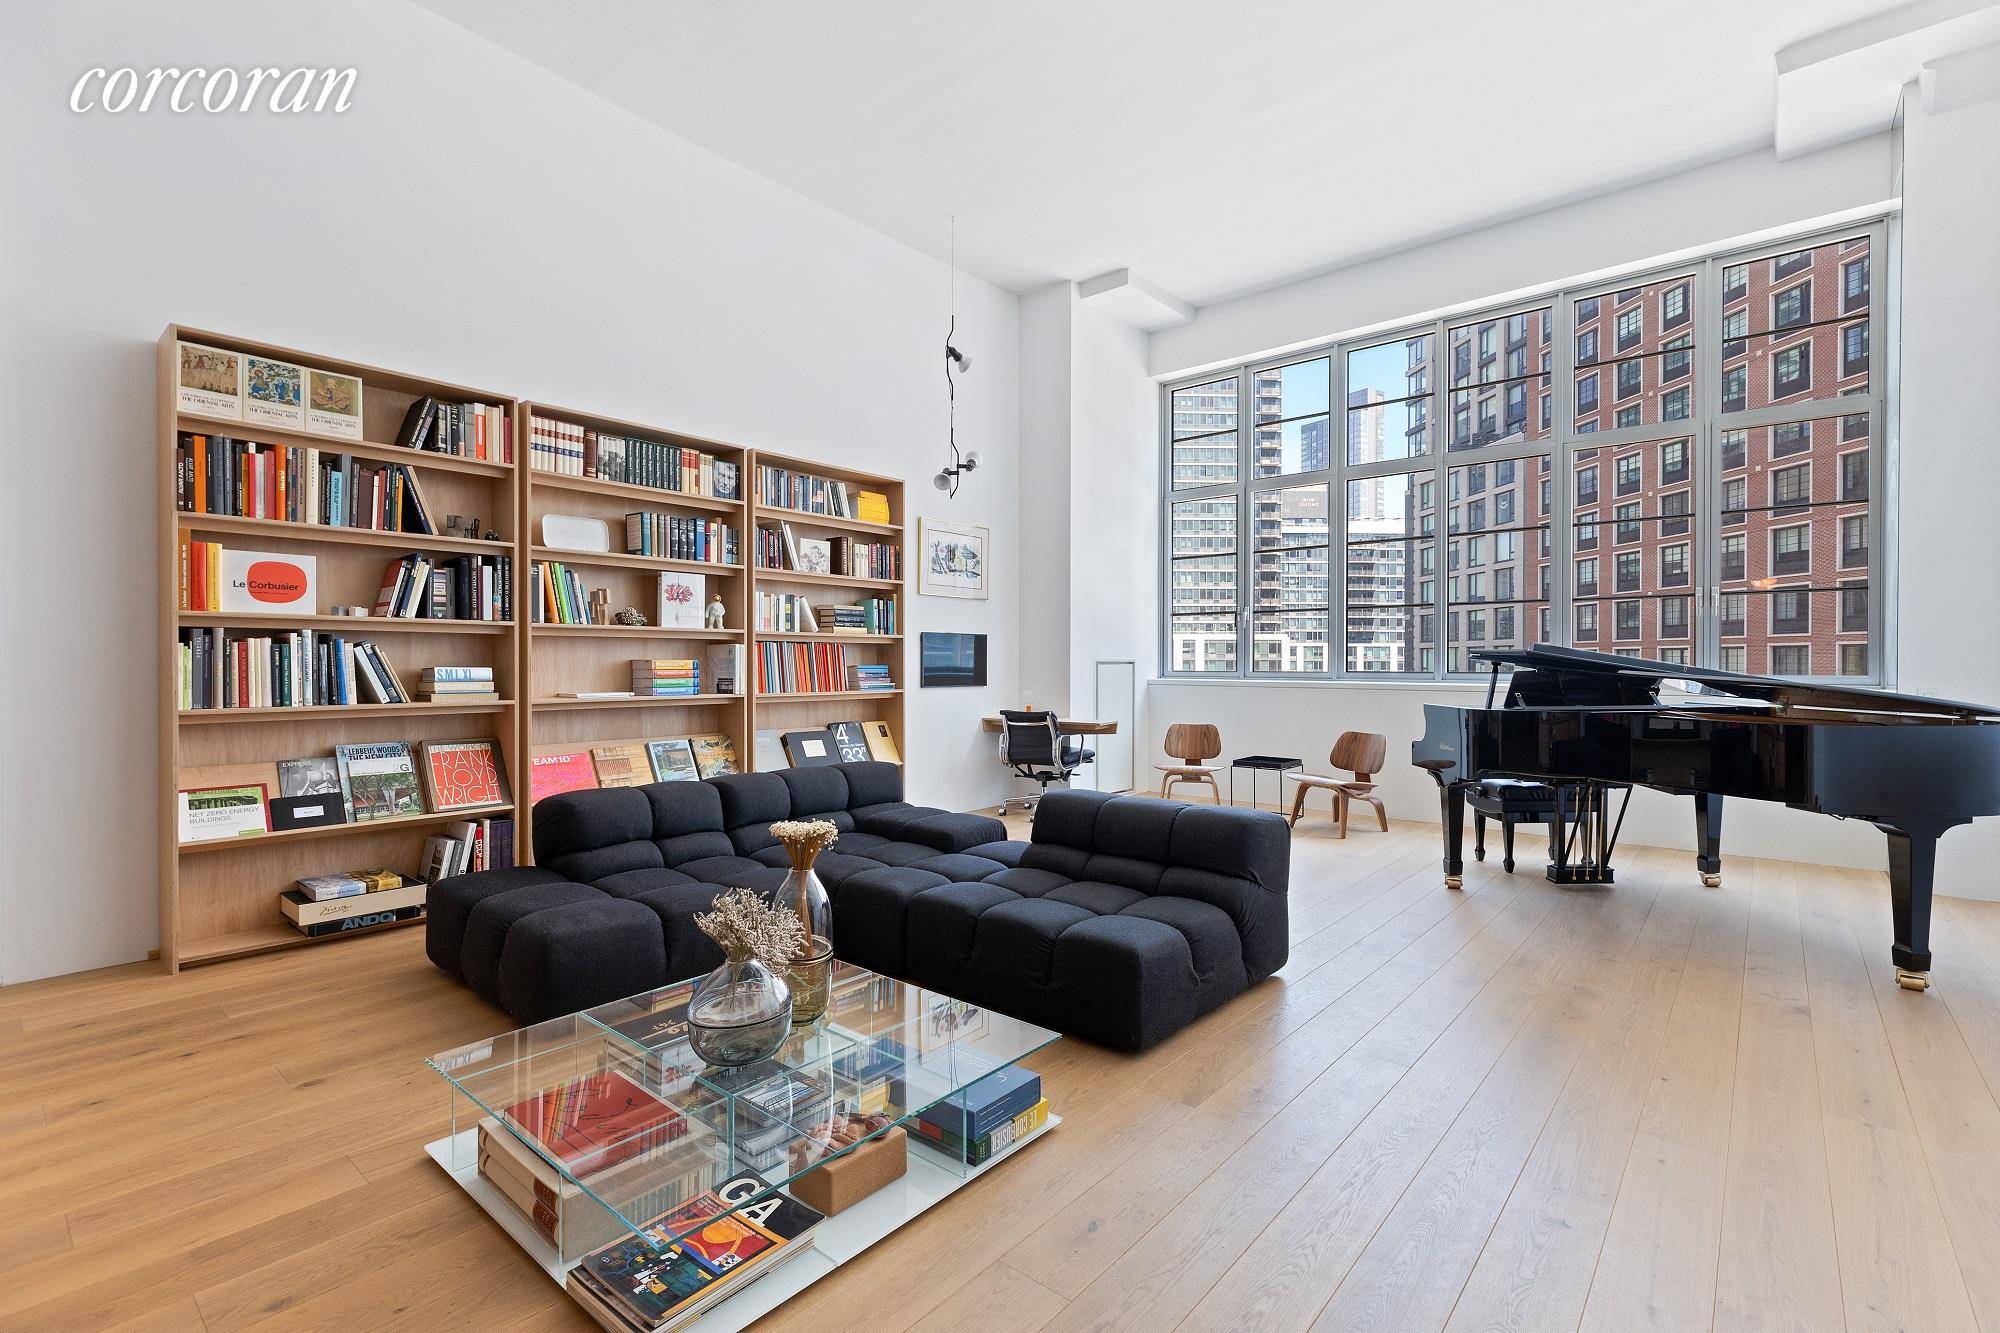 Unit 454 at Arris Lofts is a stunning example of the quintessential New York City loft.